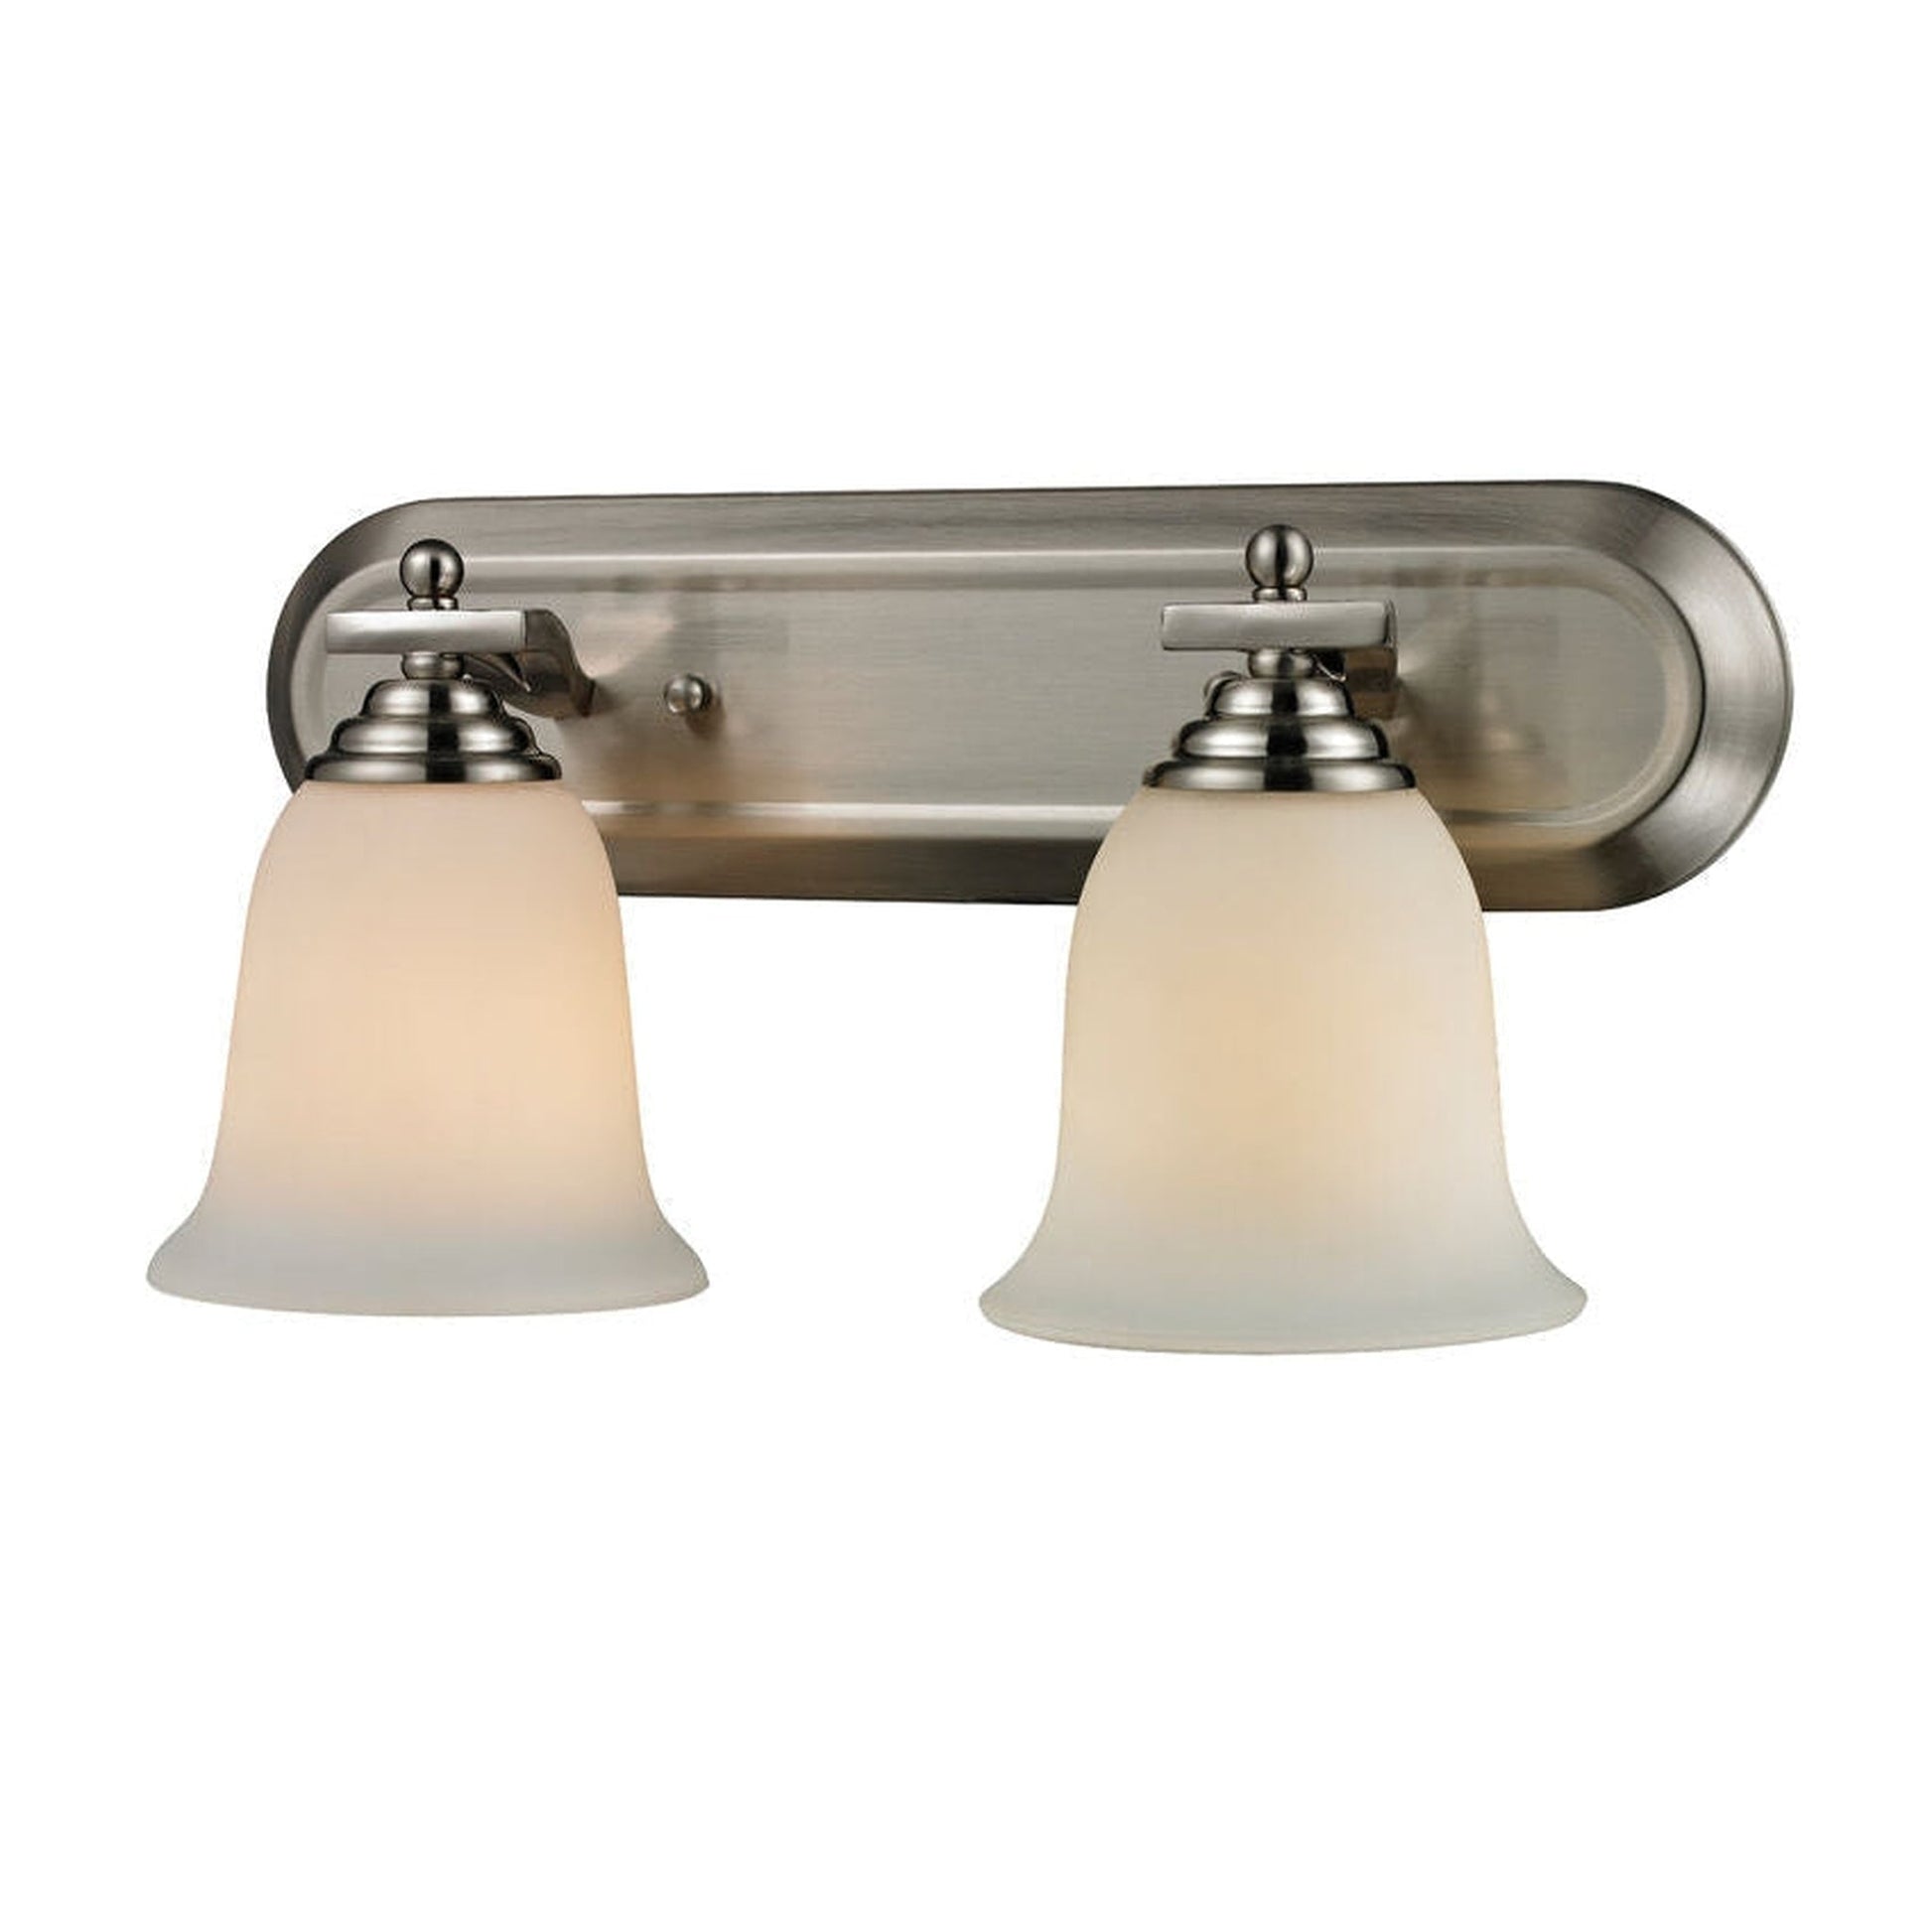 Z-Lite Lagoon 18" 2-Light Brushed Nickel Vanity Light With Matte Opal Glass Shade